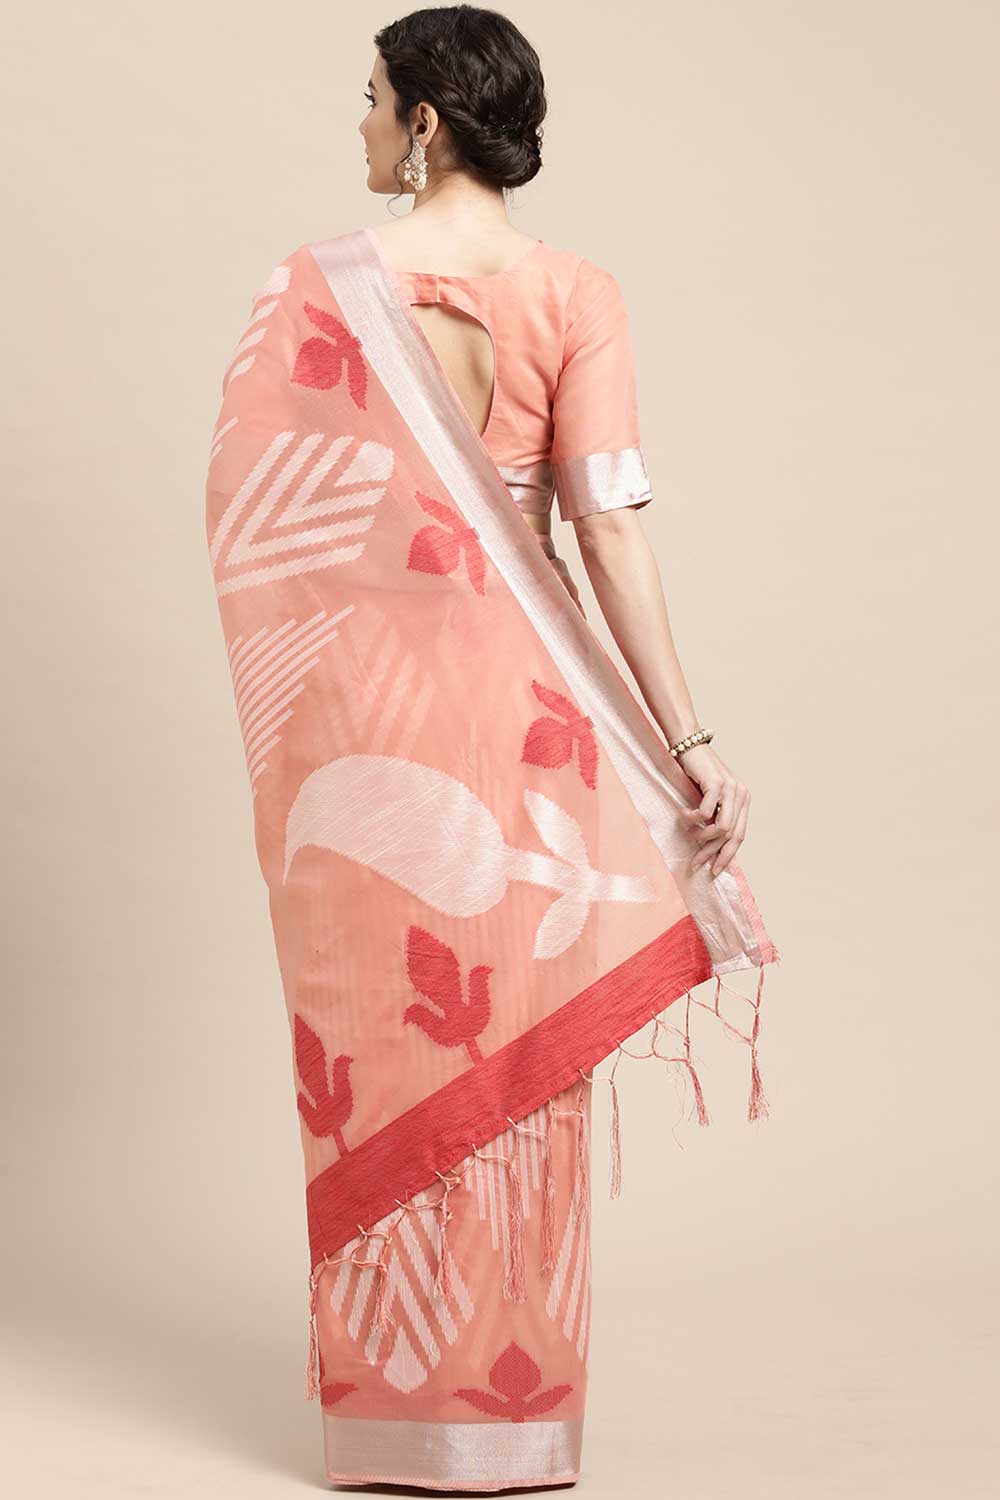 Shop Tia Peach Geometric Design Blended Cotton One Minute Saree at best offer at our  Store - One Minute Saree